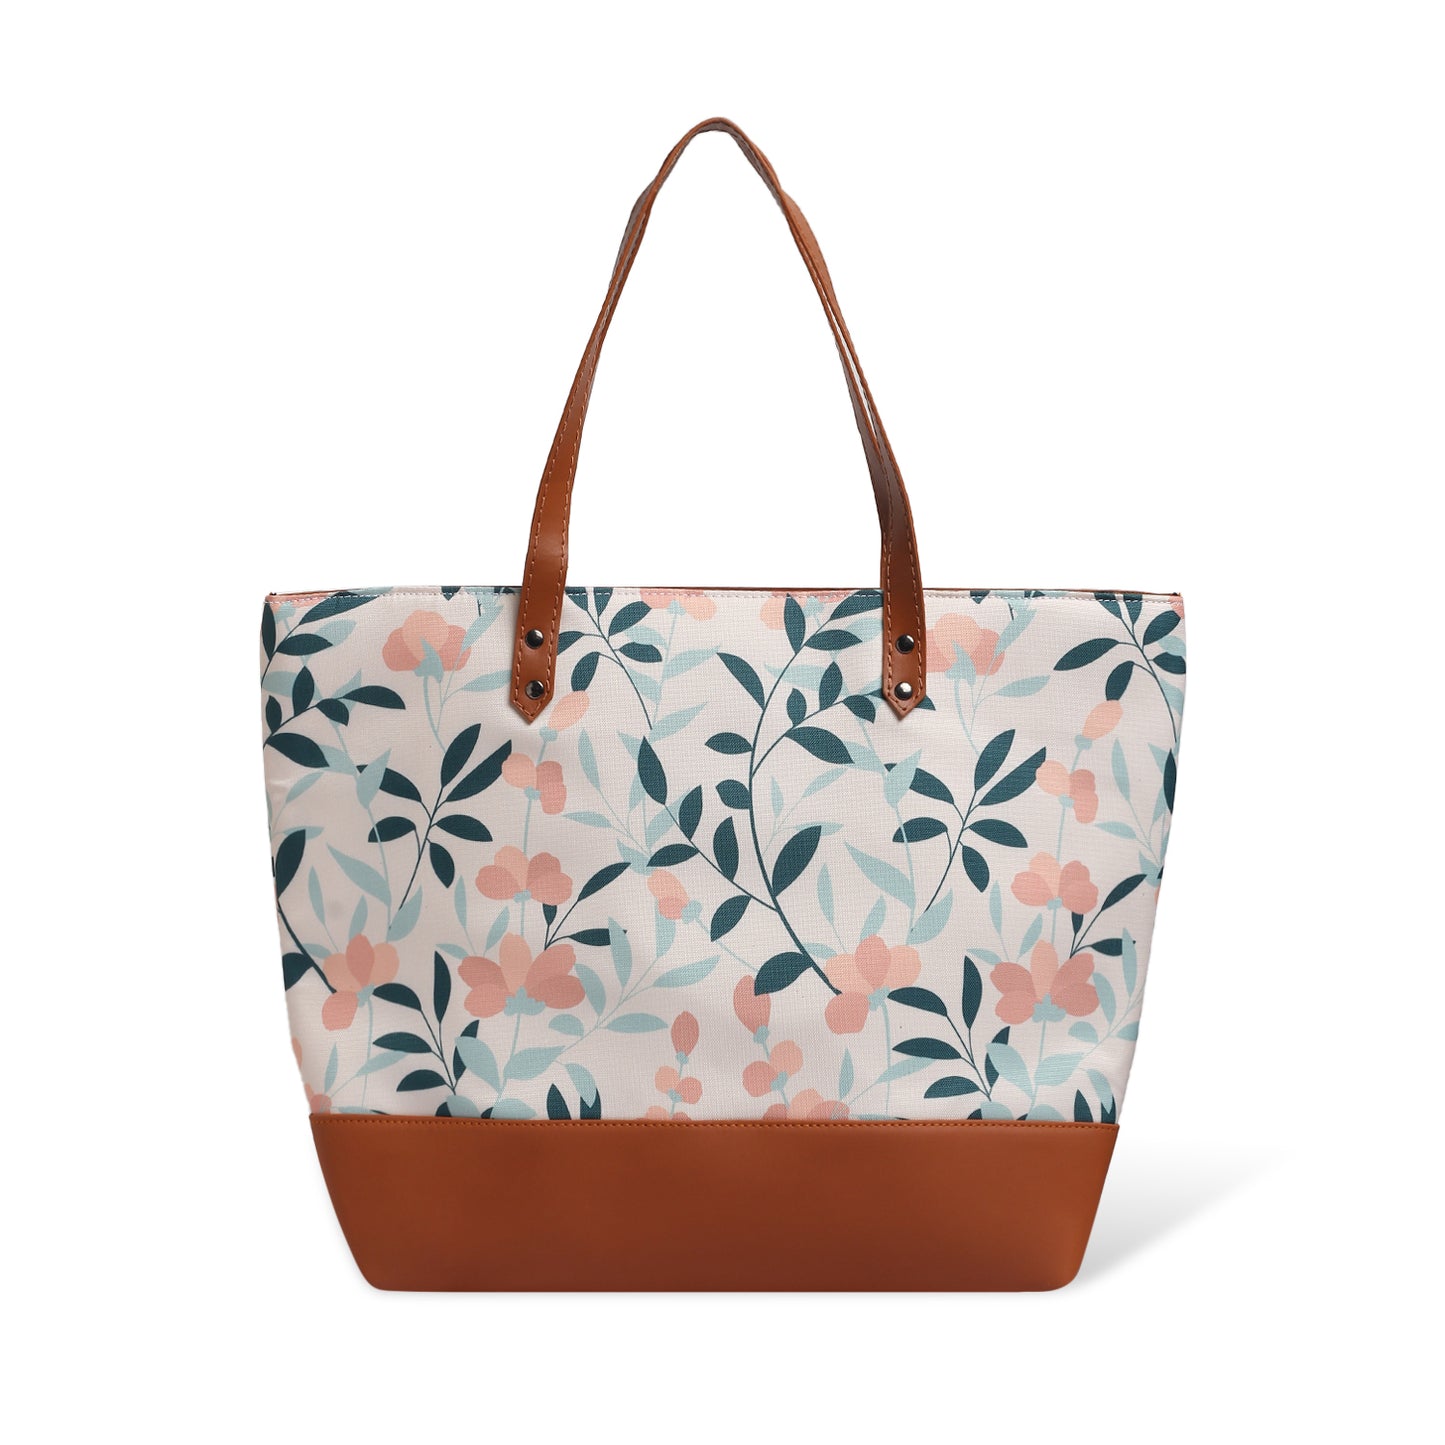 Trendy tote bag with floral print and brown leather handle, a must-have fashion item.